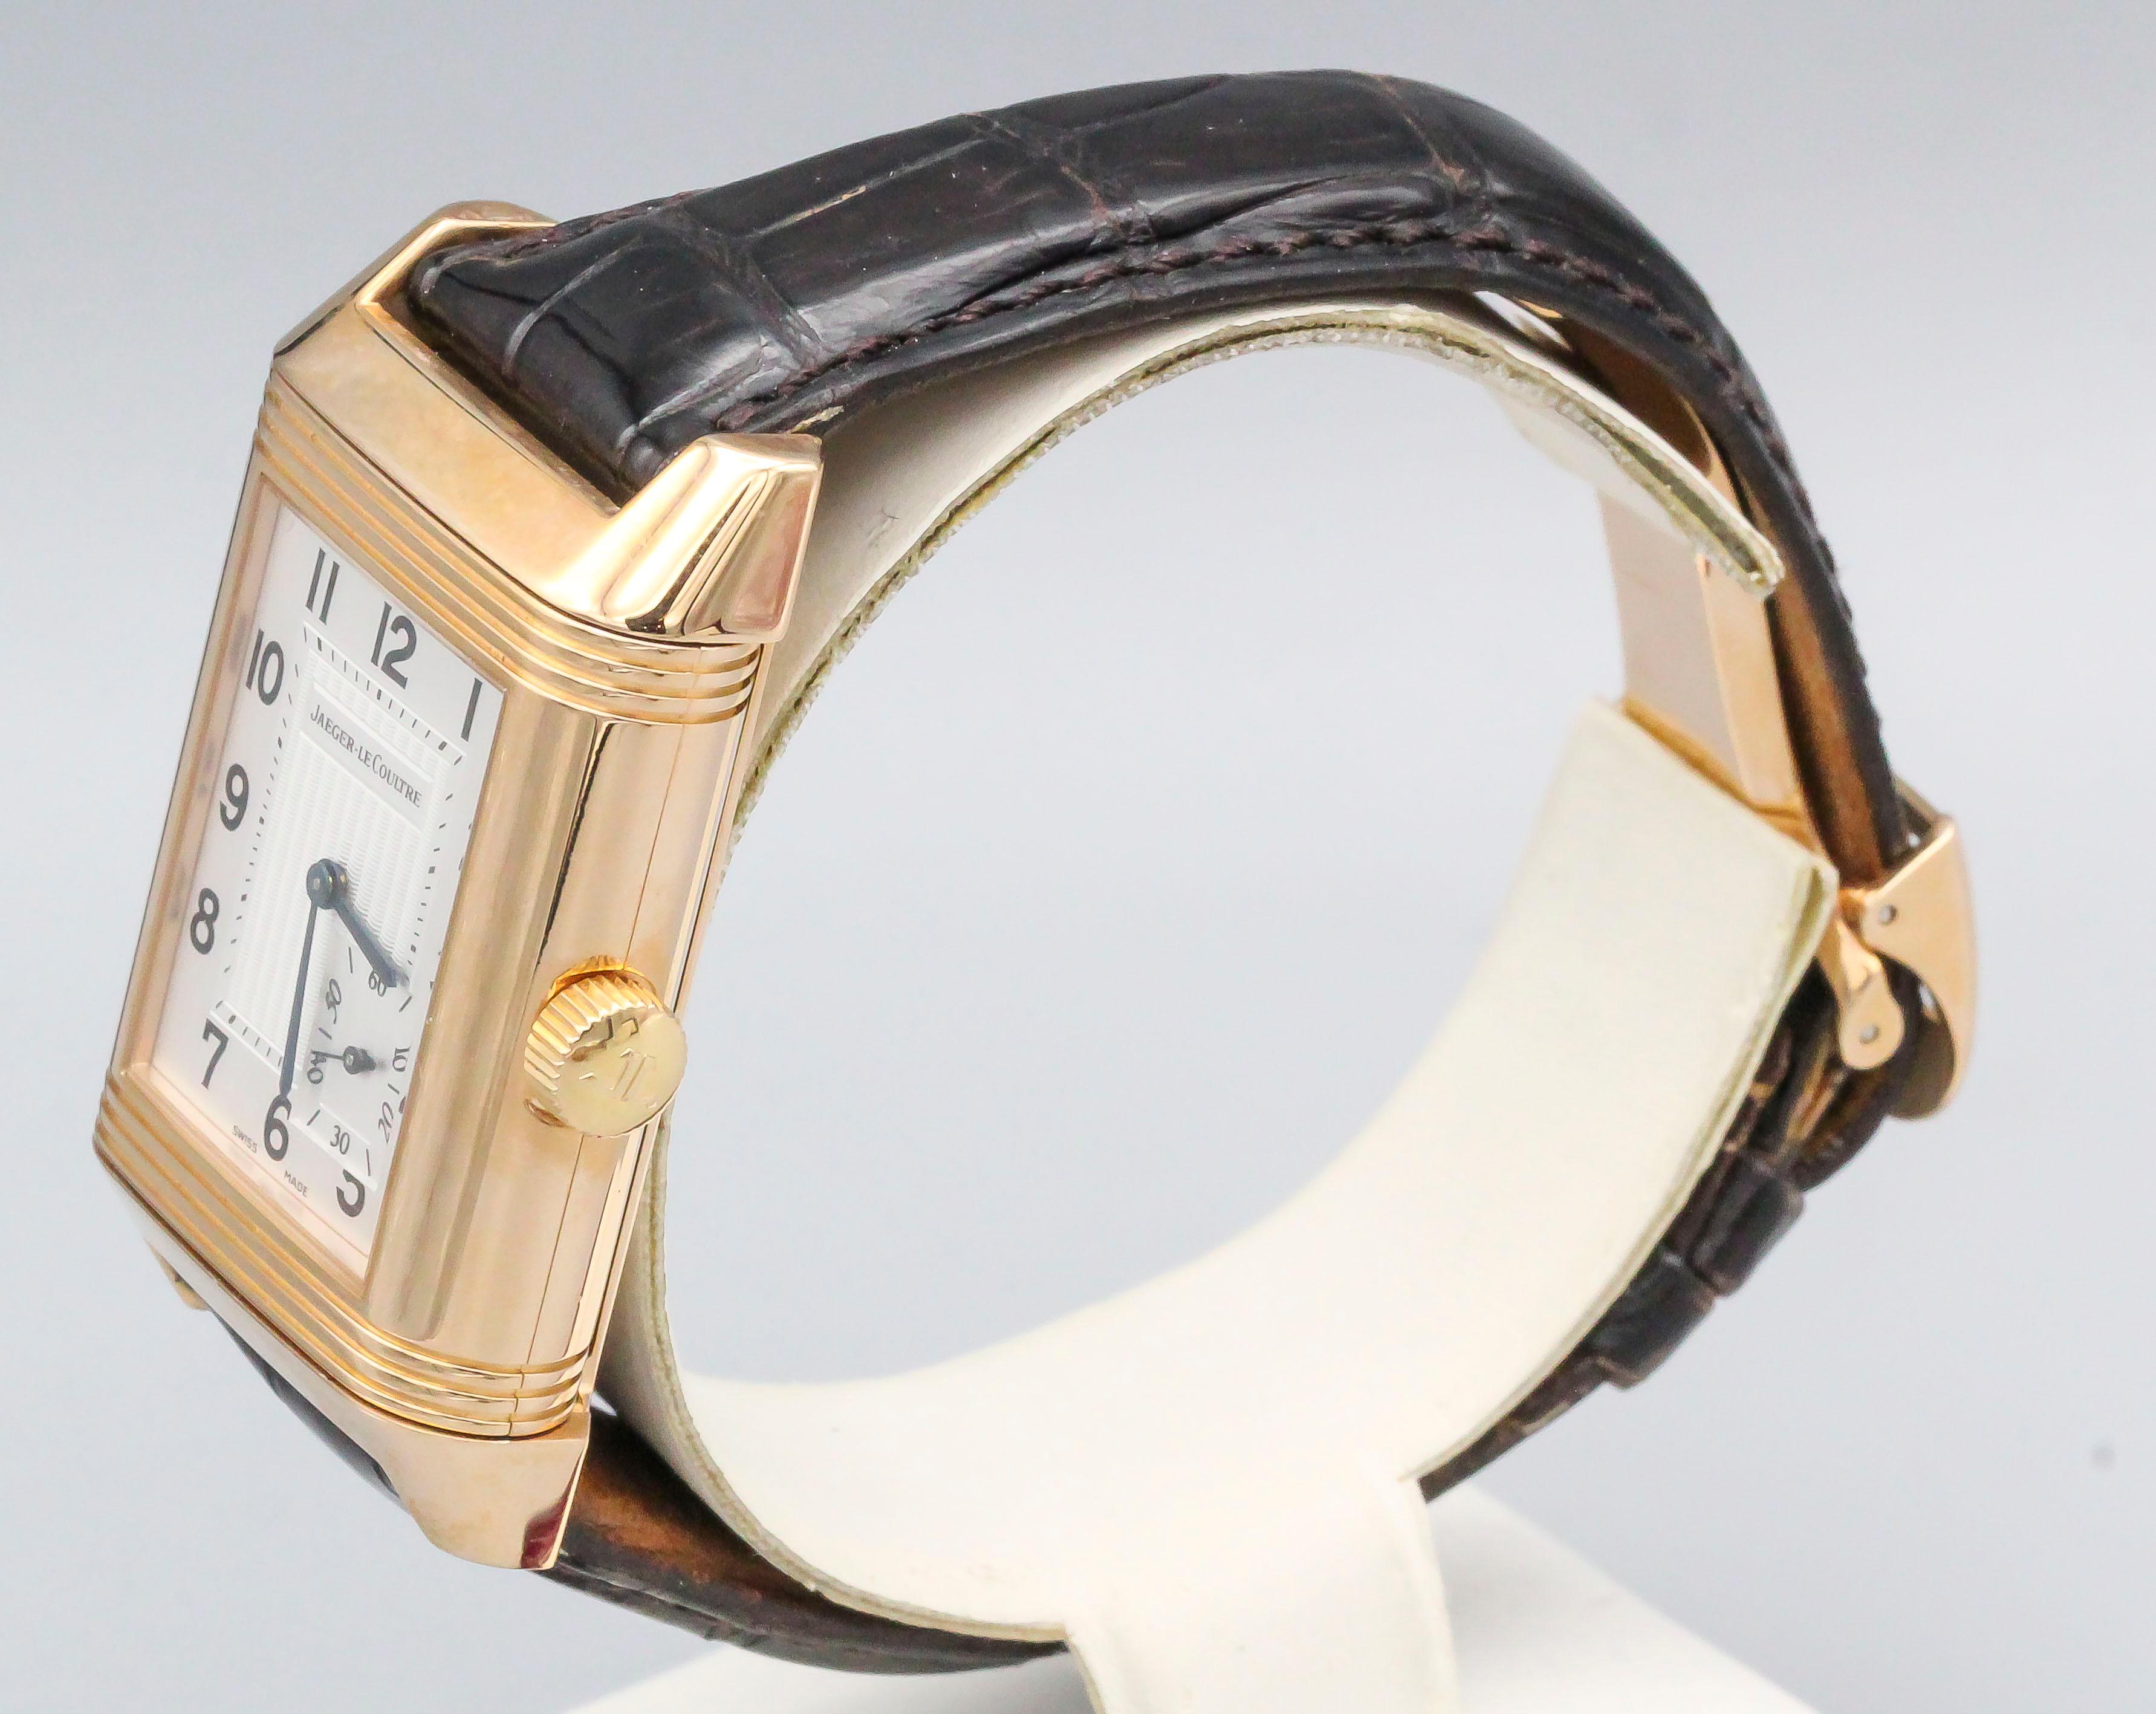 Timeless 18K Rose Gold Jaeger LeCoultre grande (large) reverso wristwatch. It features Arabic Numerals, automatic movement and offset seconds dial at 5 o'clock. The back shows power reserve in hours. Comes with original crocodile strap and JL